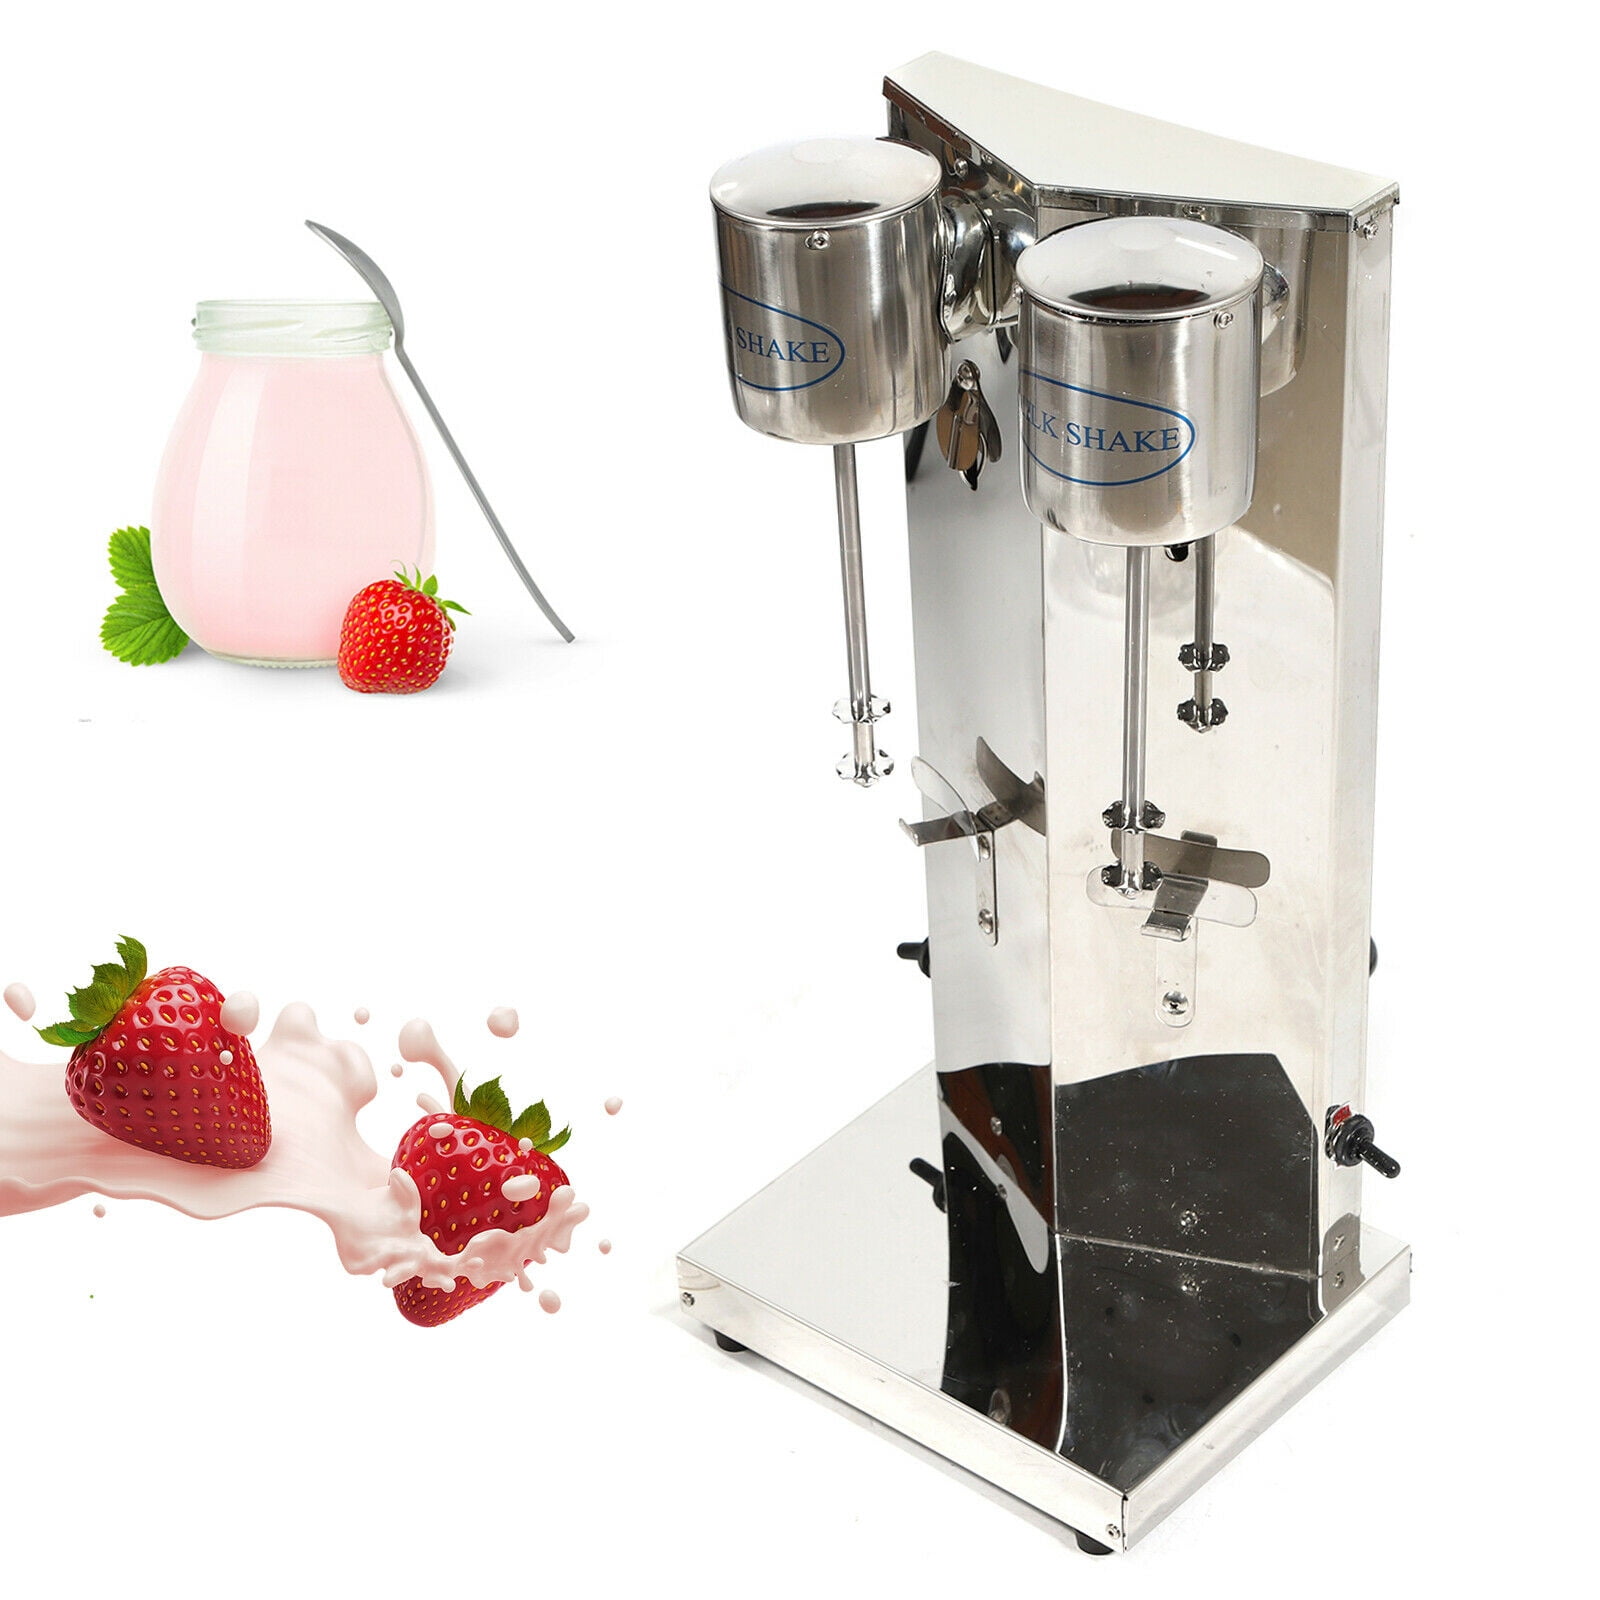 Milkshake Maker, Stainless Steel Drink Mixer, Electric Commercial Milk  shake Machine, for Frappe, Frothy Milk, Juices and Smoothies, Mixer Batter